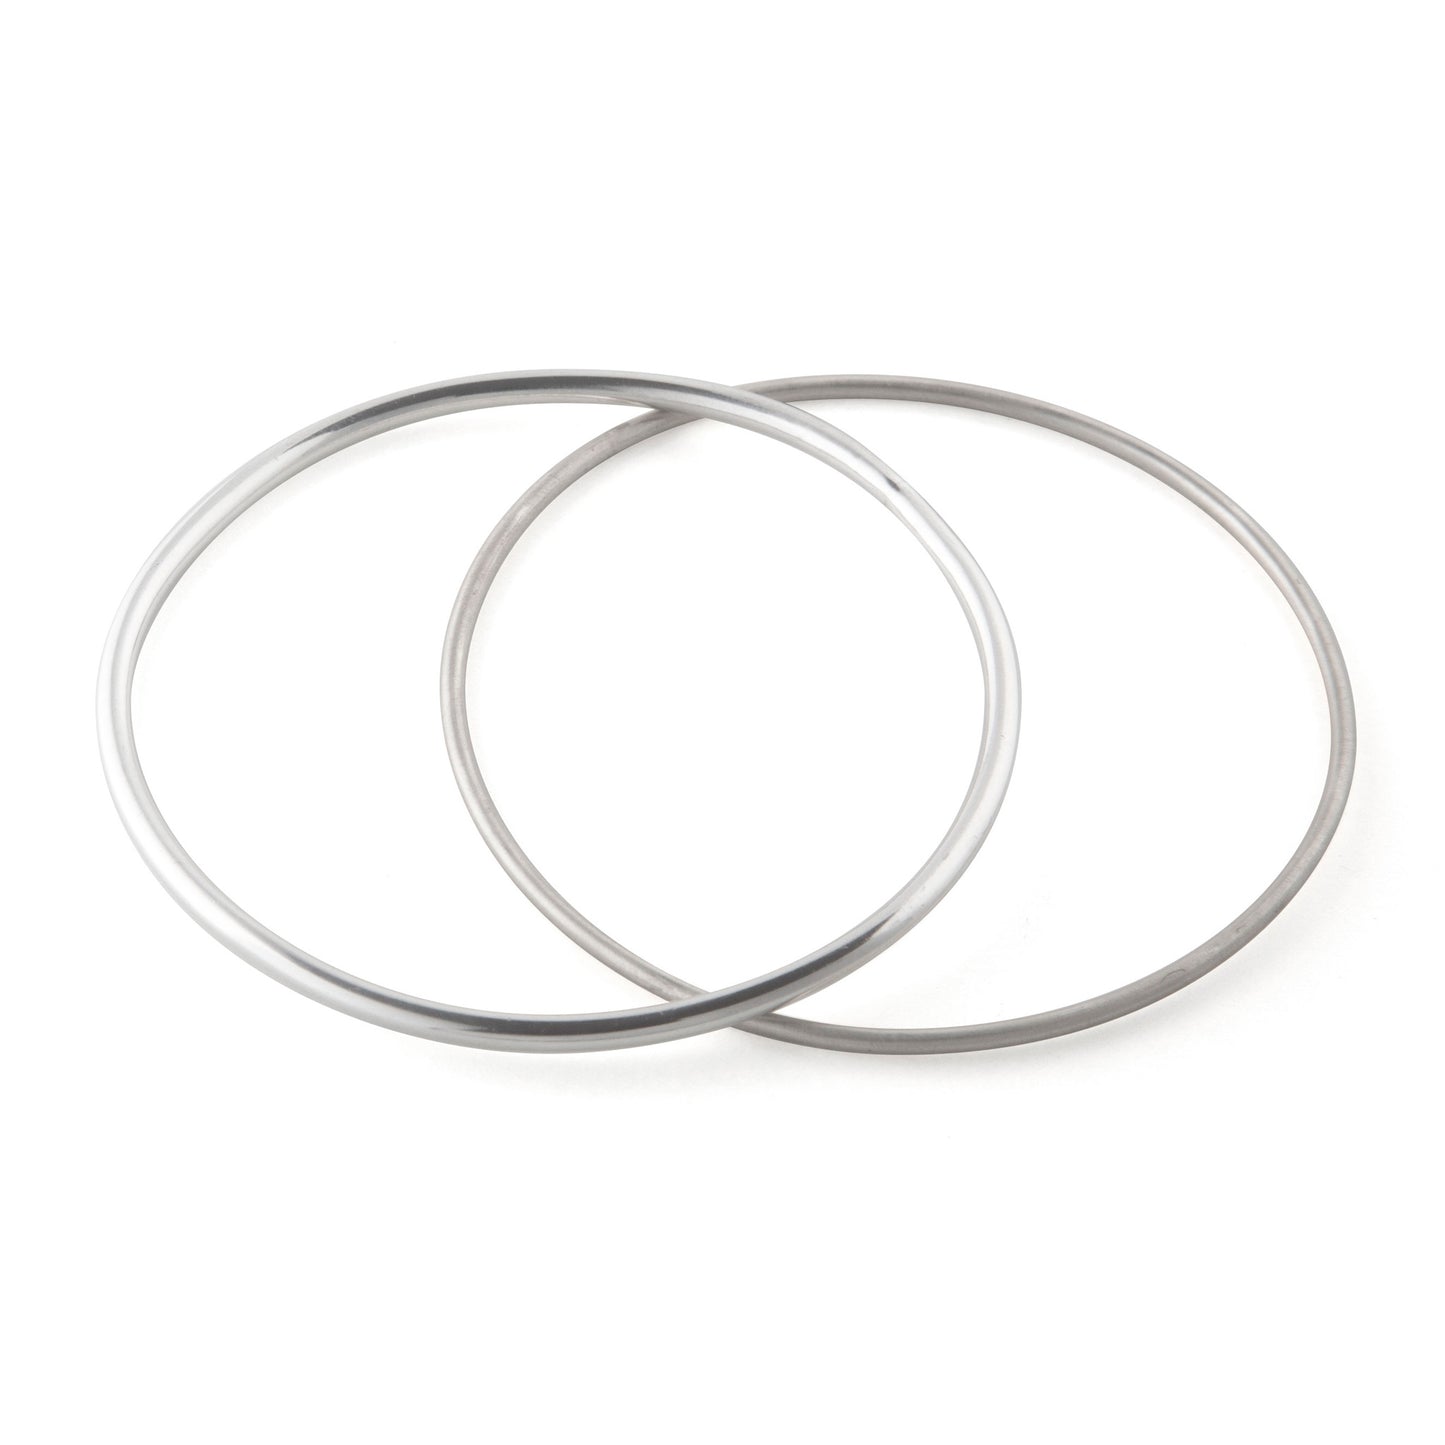 Two silver Halo bangles by Katy Luxton